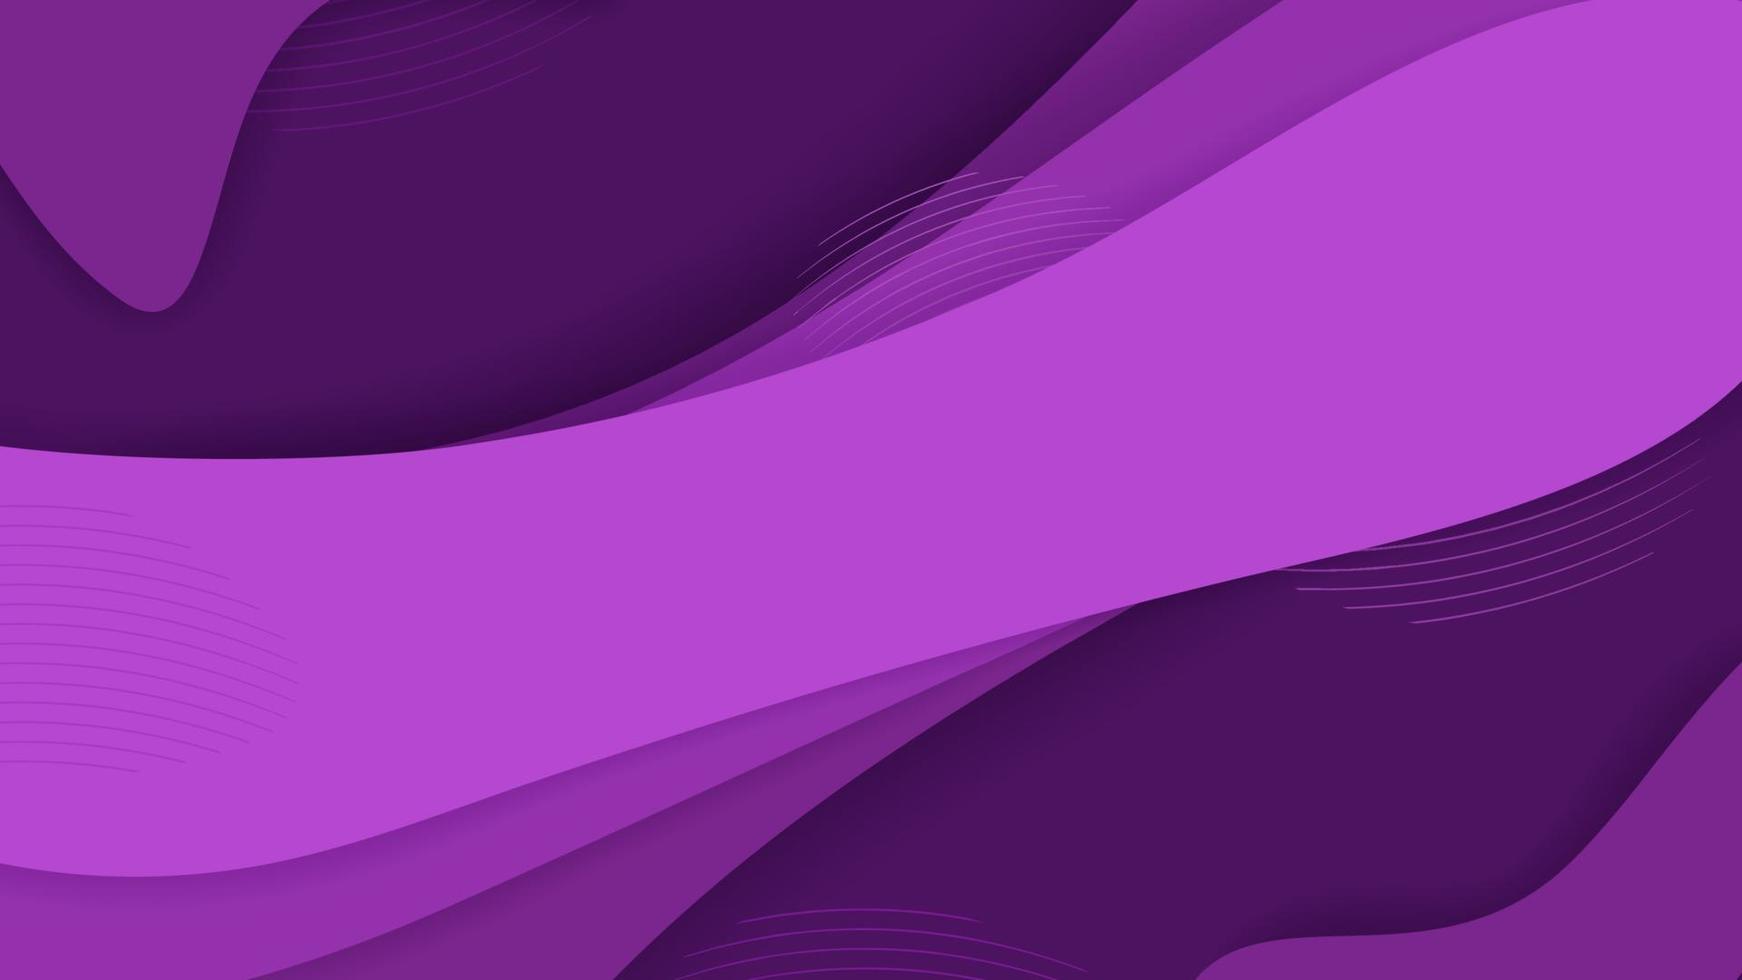 Futuristic purple gradient 3d wave shapes with line colored background vector graphic illustration. Abstract colorful liquid neon geometric backdrop creative design